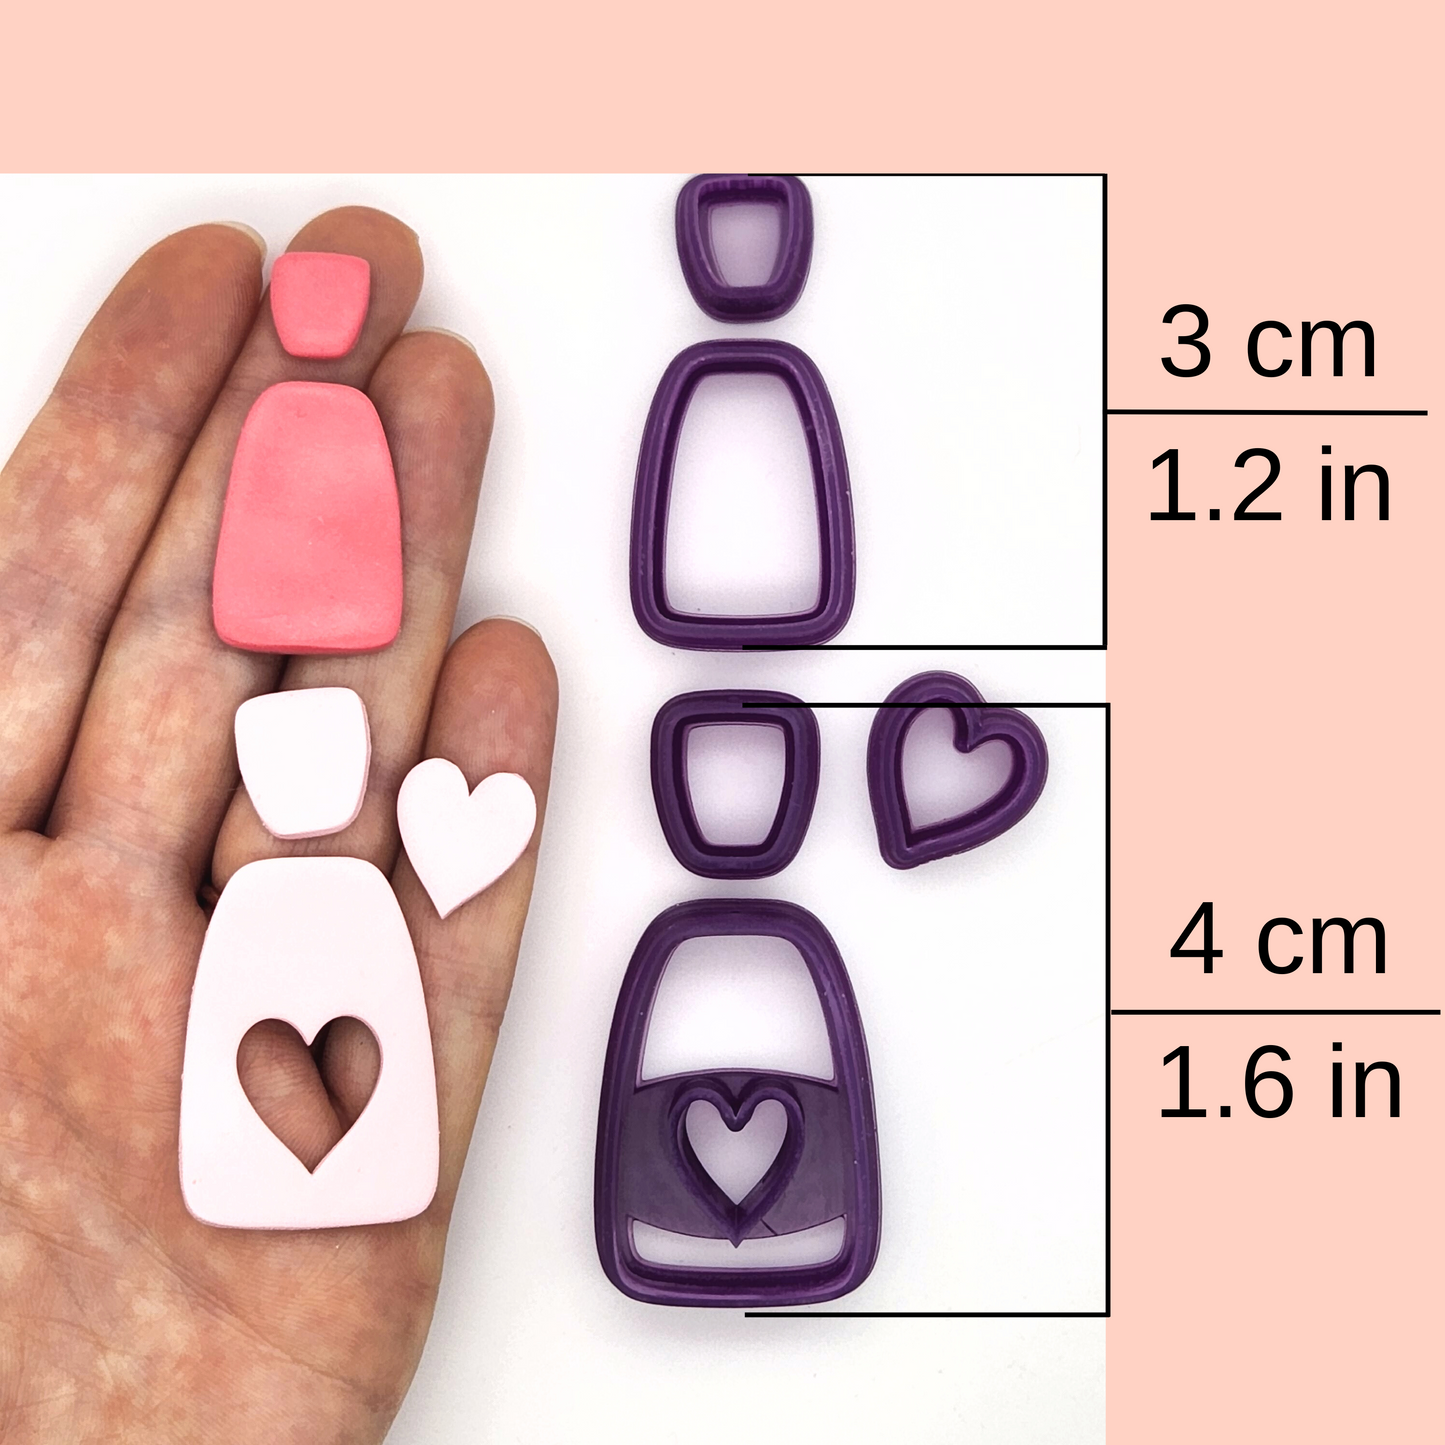 Amara Polymer Clay Cutter Set available sizes, 3 centimeters / 1.2 inches, and 4 centimeters / 1.6 inches